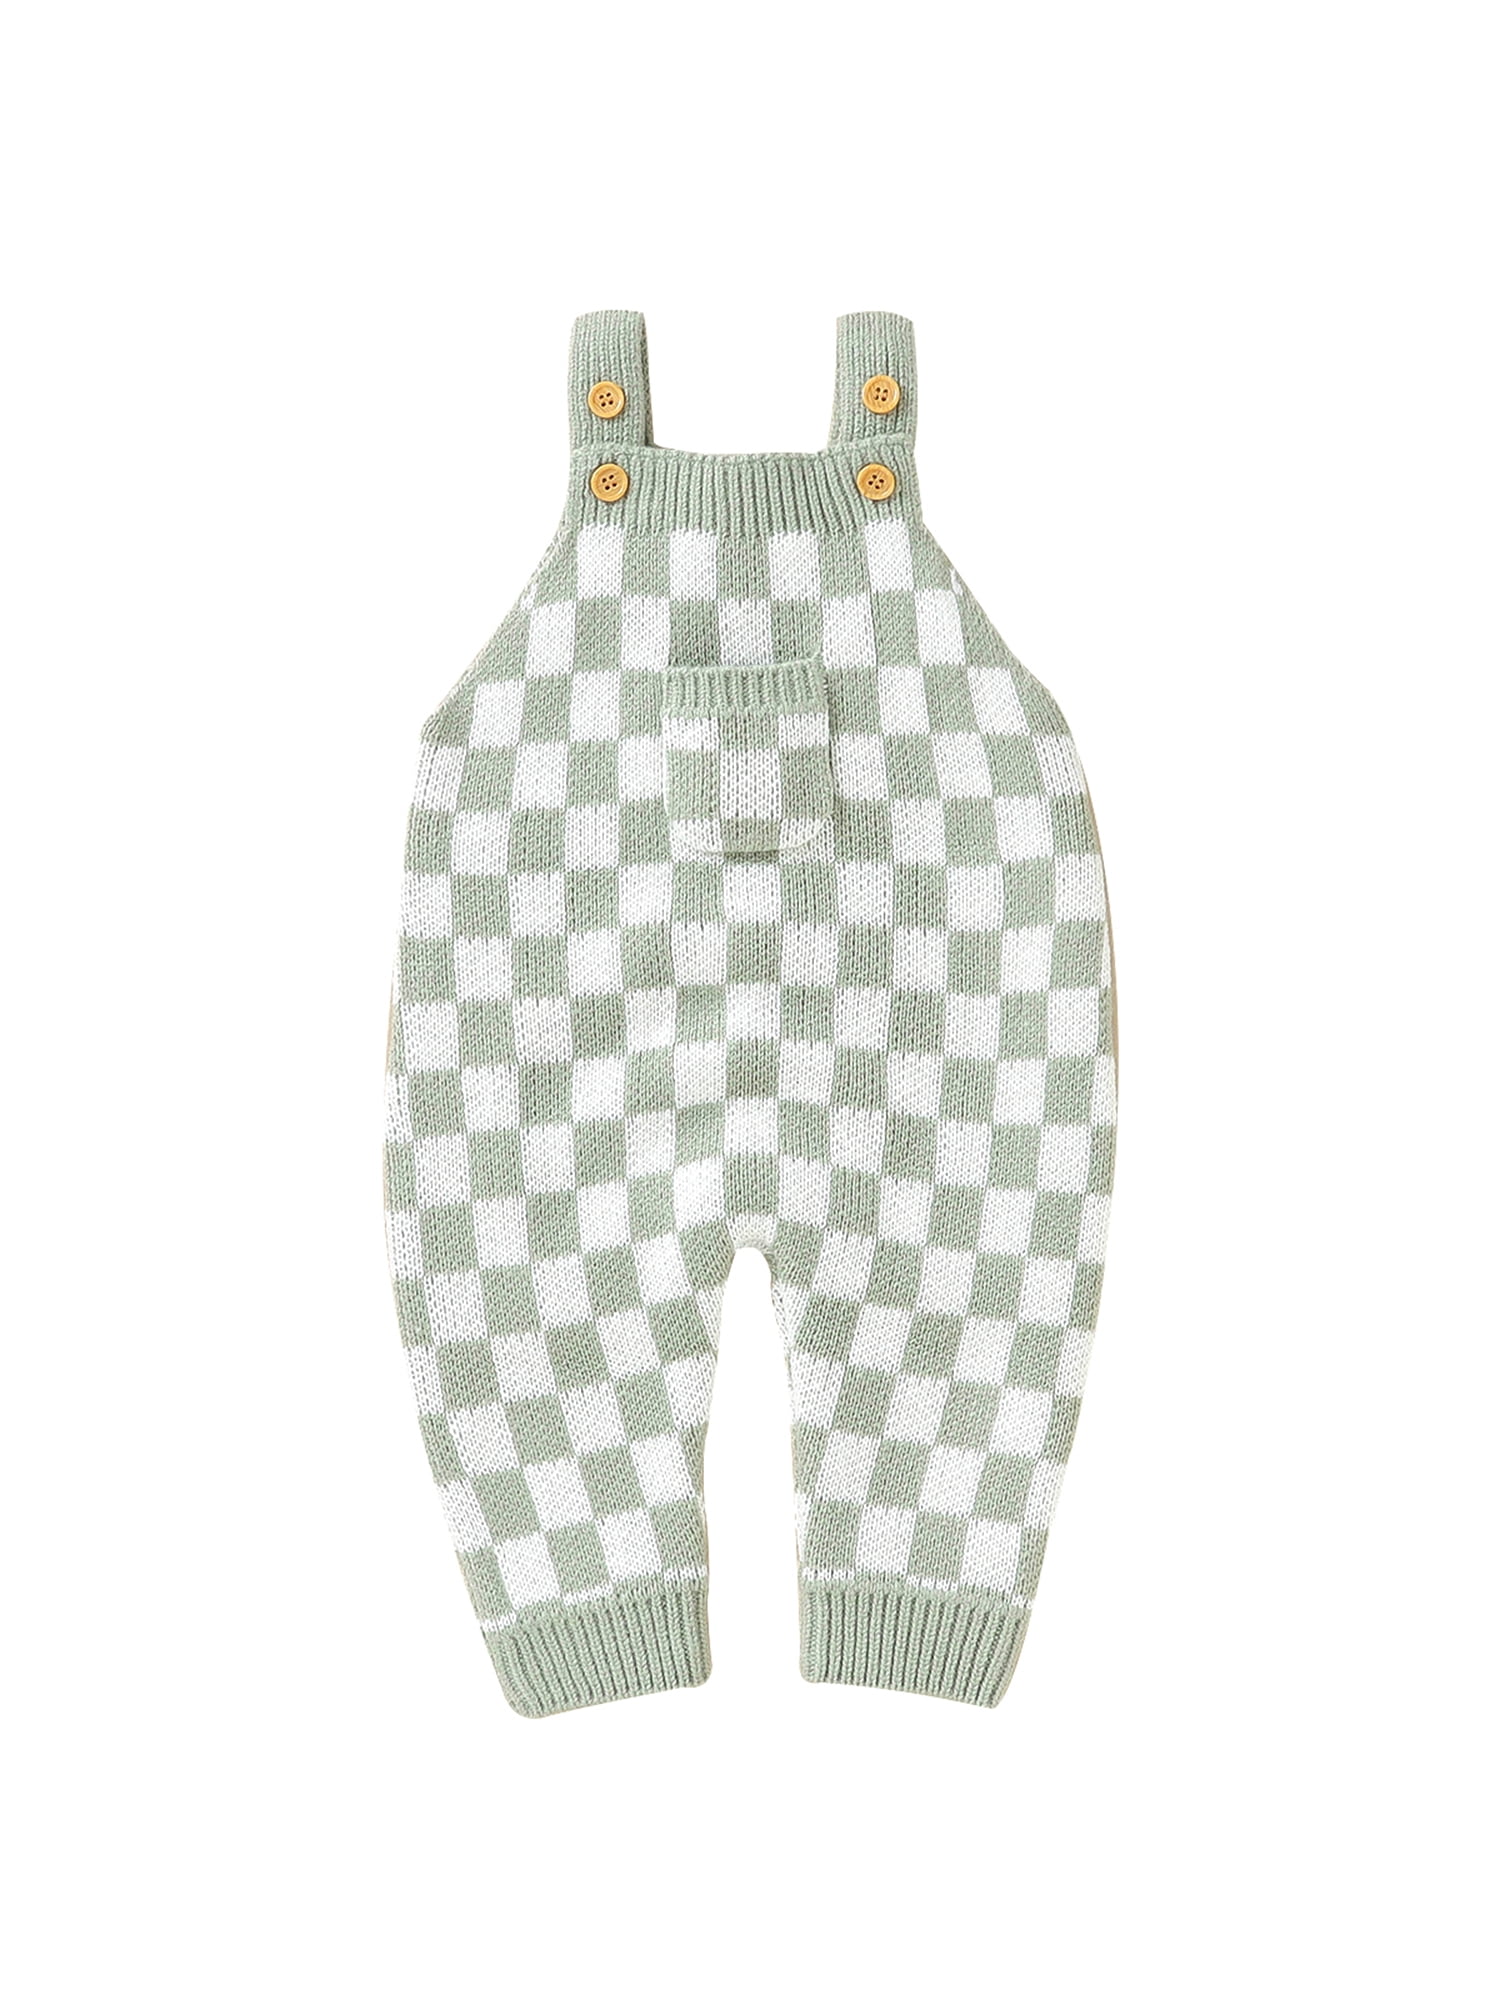 Jkerther Infant Baby Girls Boys Overalls Checkerboard Plaid Print Knitted Jumpsuit Romper Straps Suspender Long Pants, Infant Unisex, Size: 0-3 Months